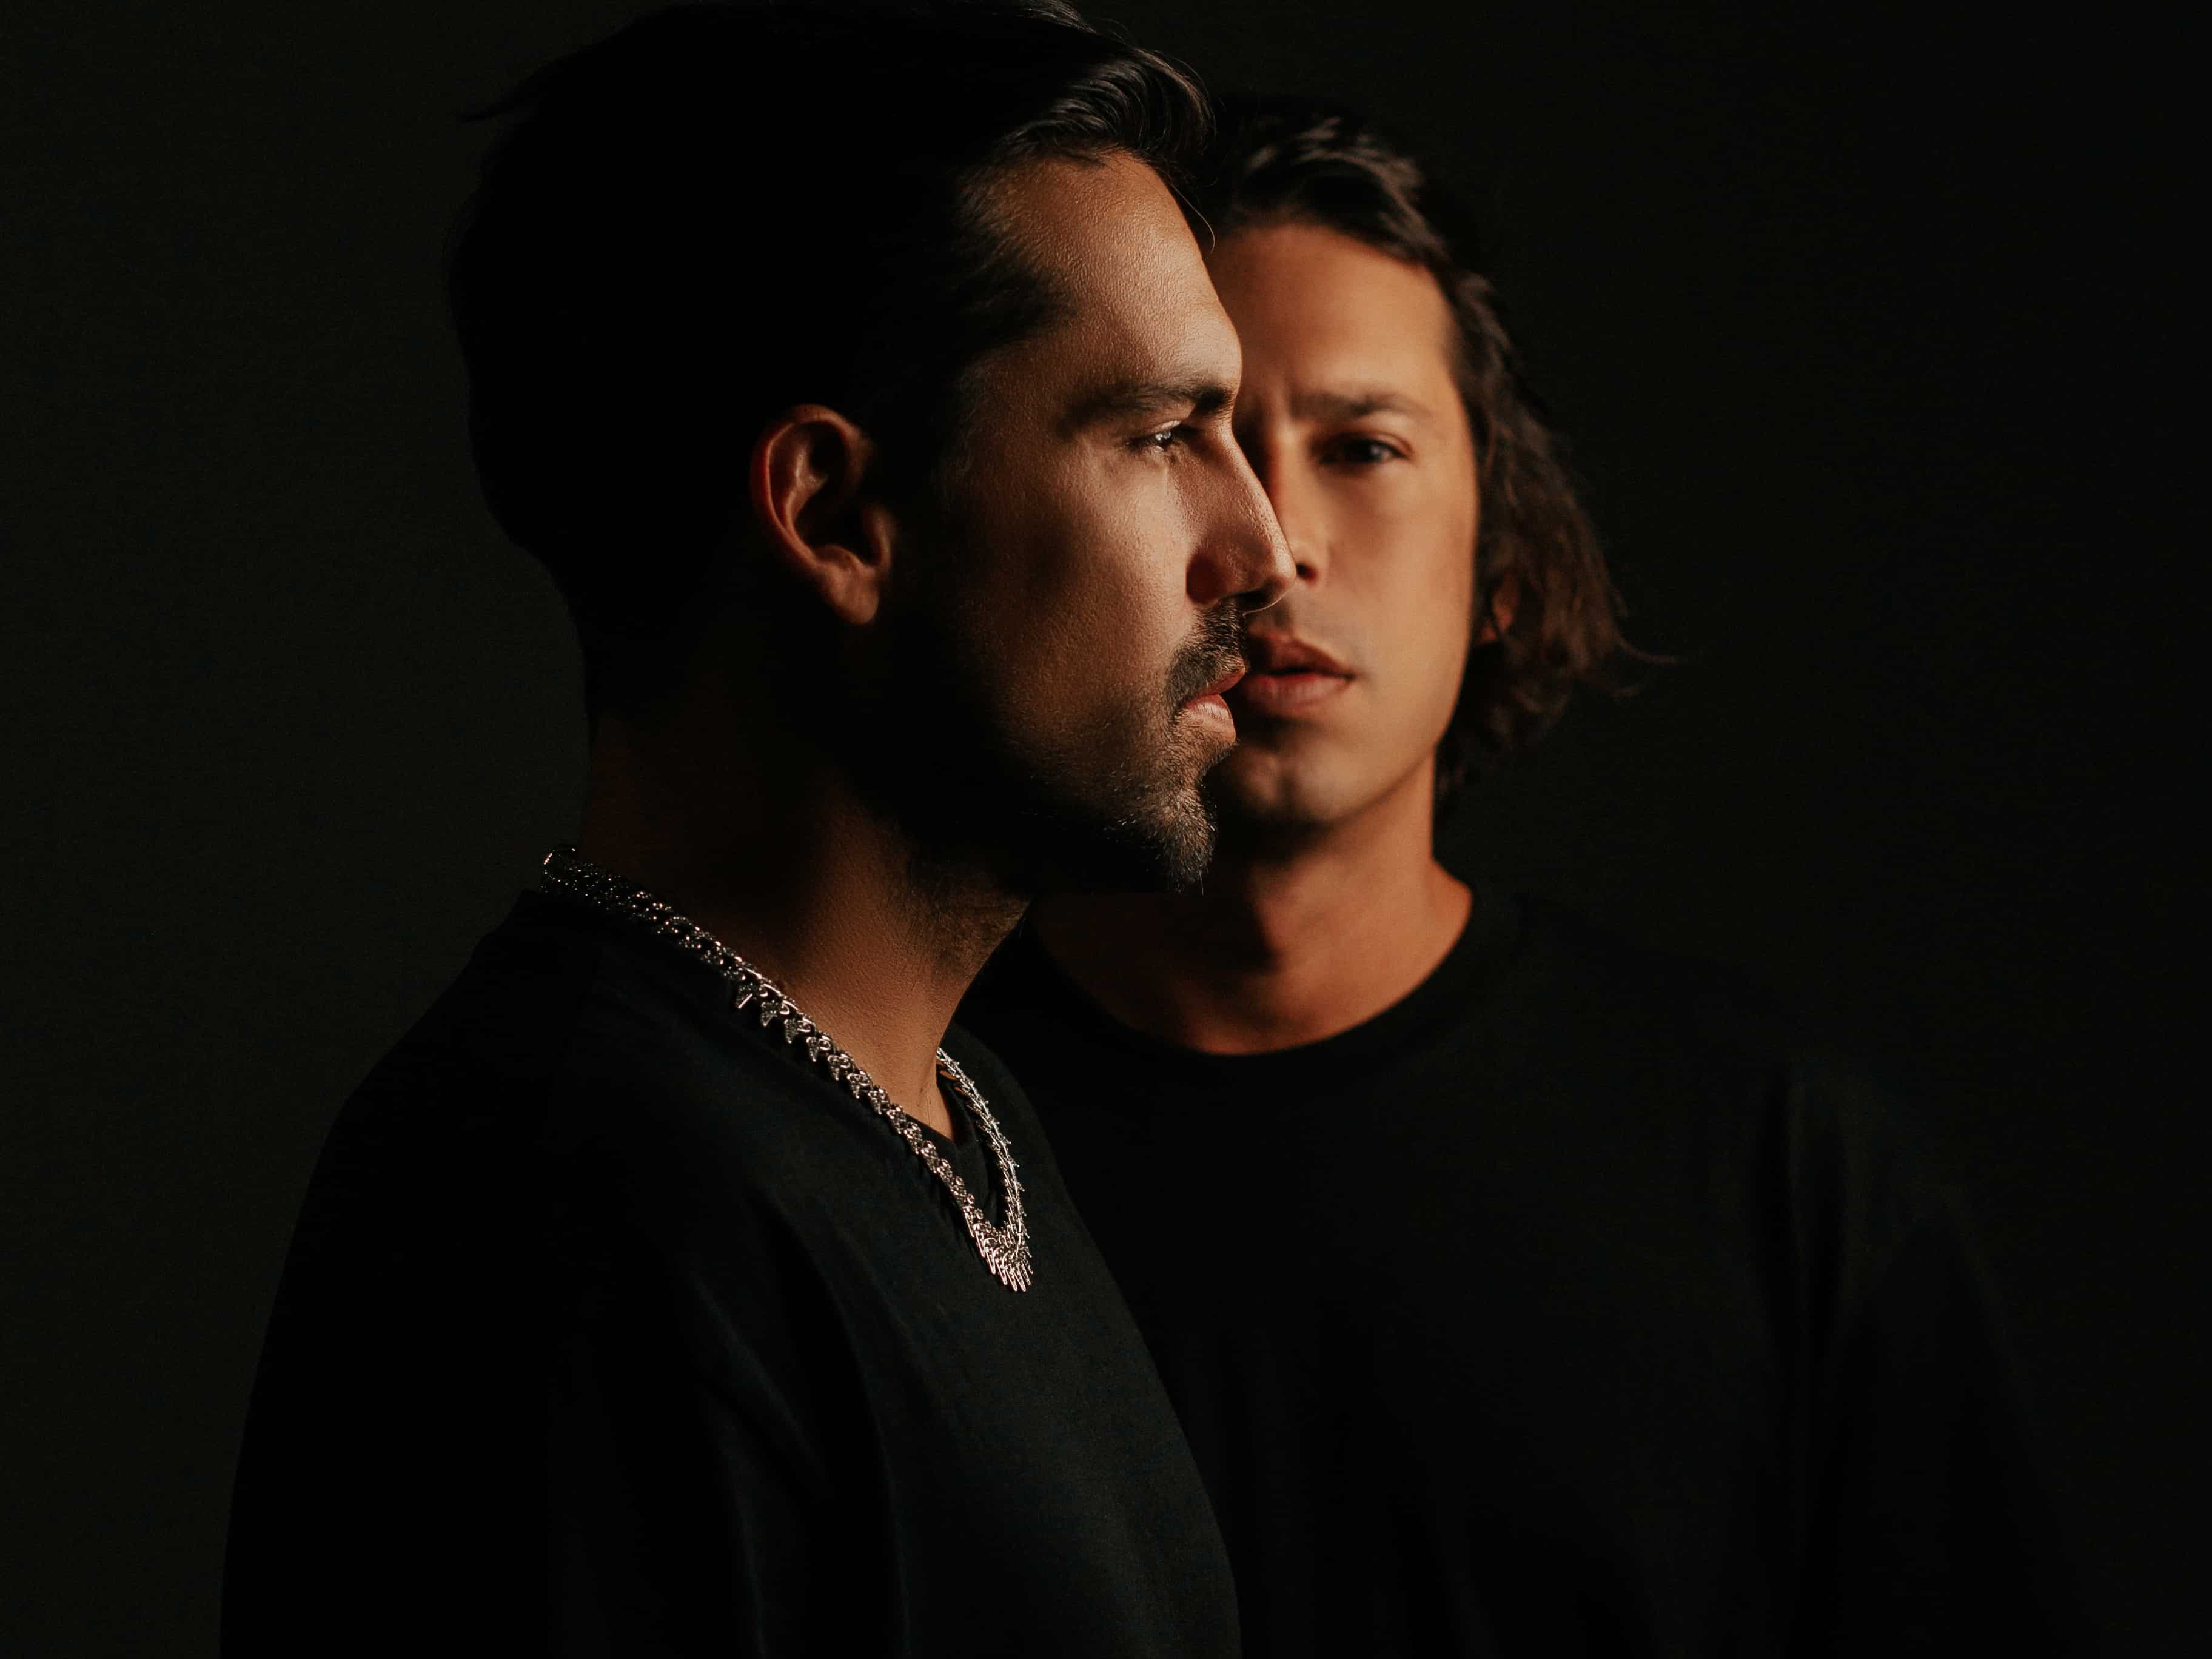 Chemical Surf joins forces with Mevil & Enigmix for ‘Bad For U’: Listen